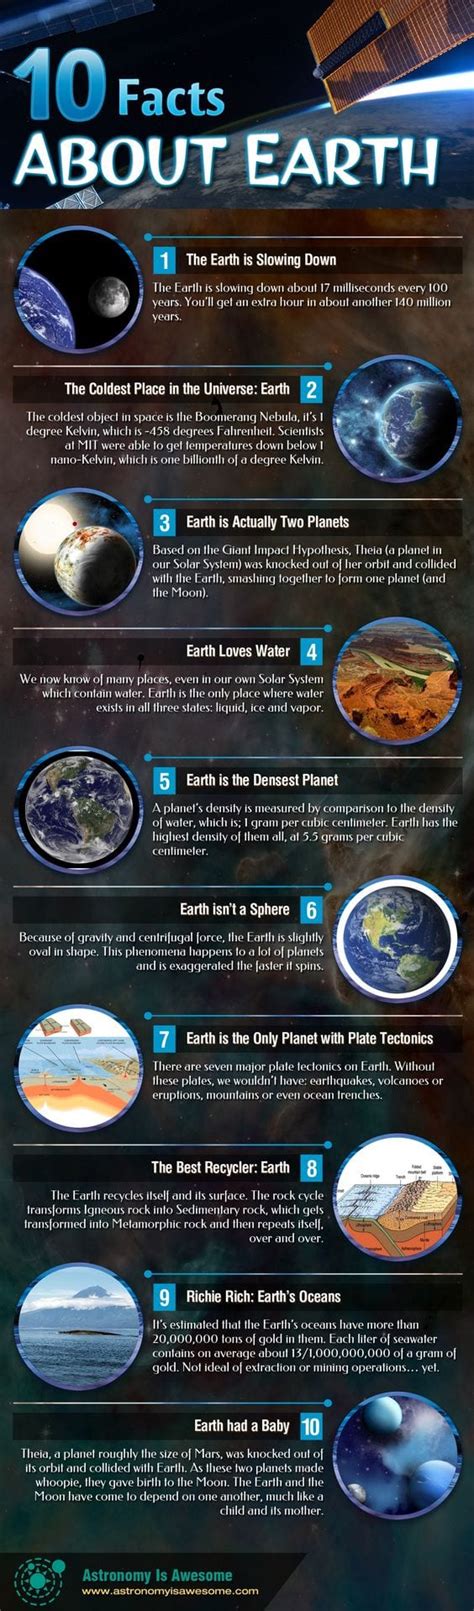 10 Interesting Facts About Earth